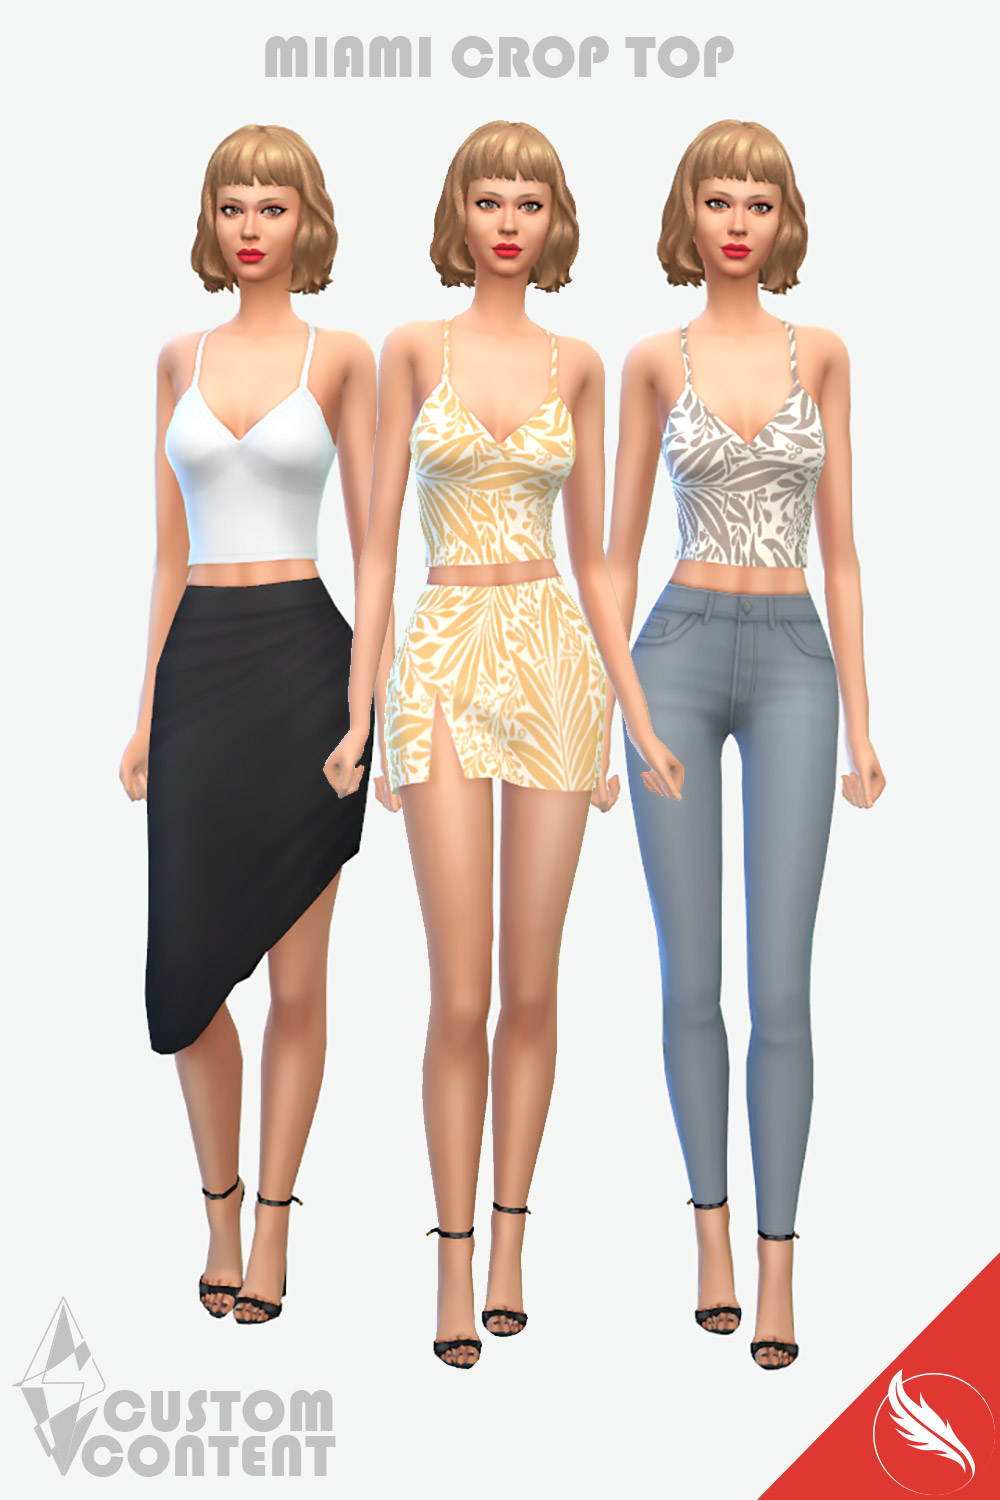 Mission Daisy Intim The Sims 4 Crop Top CC - Miami Crop Top